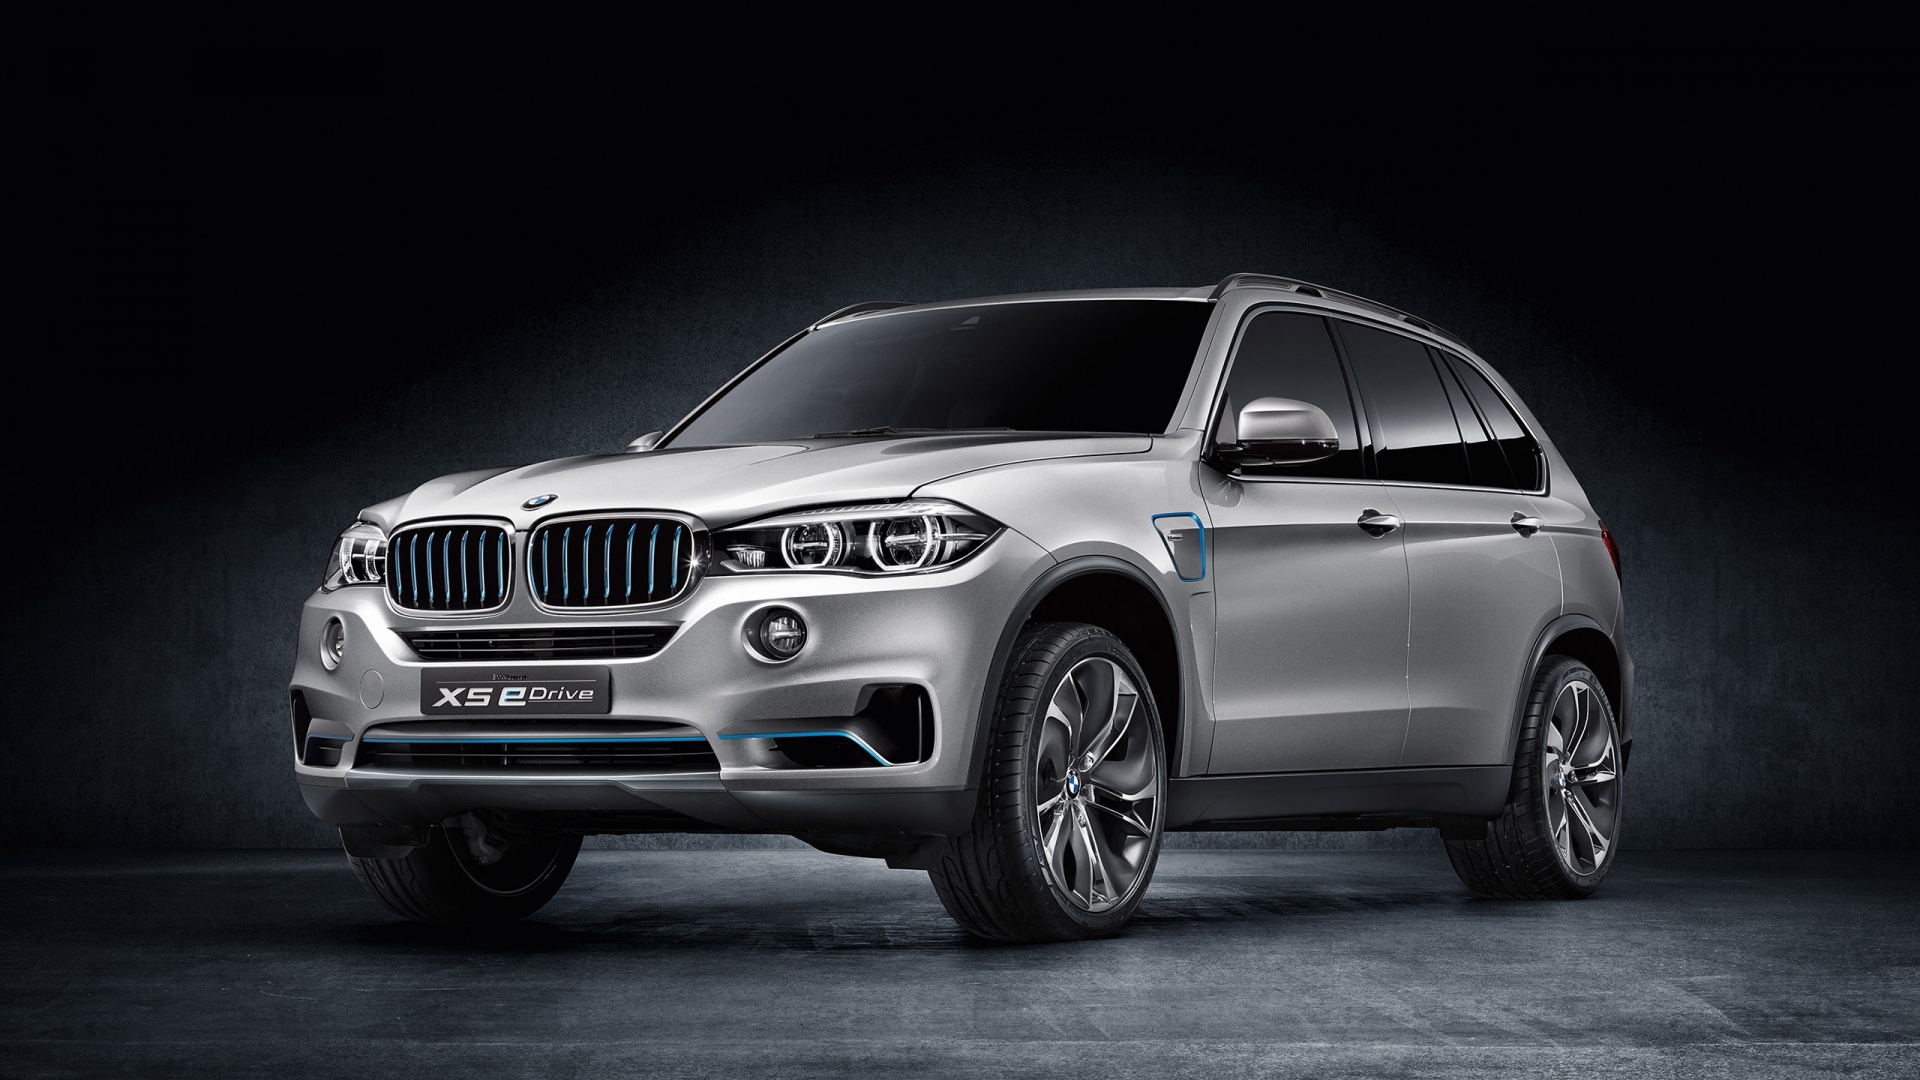 BMW X5 eDrive Concept for 1920 x 1080 HDTV 1080p resolution